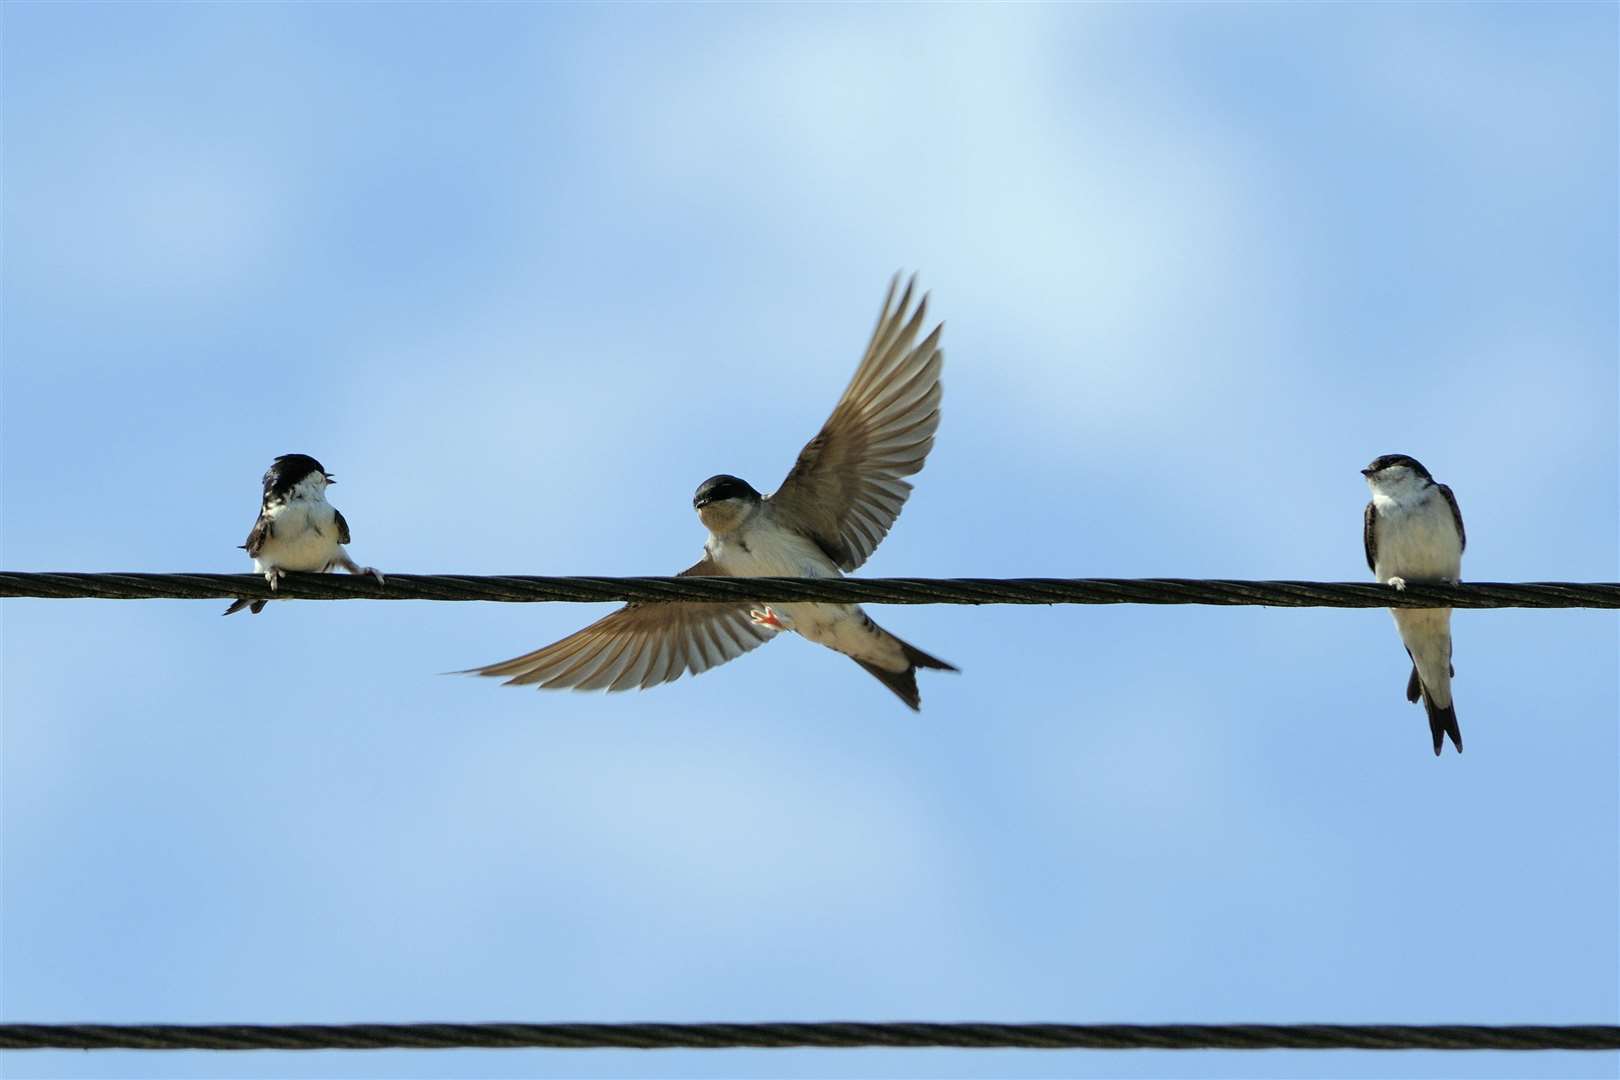 House martins on telephone wires gather in preparation for migration. Picture courtesy of the RSPB.